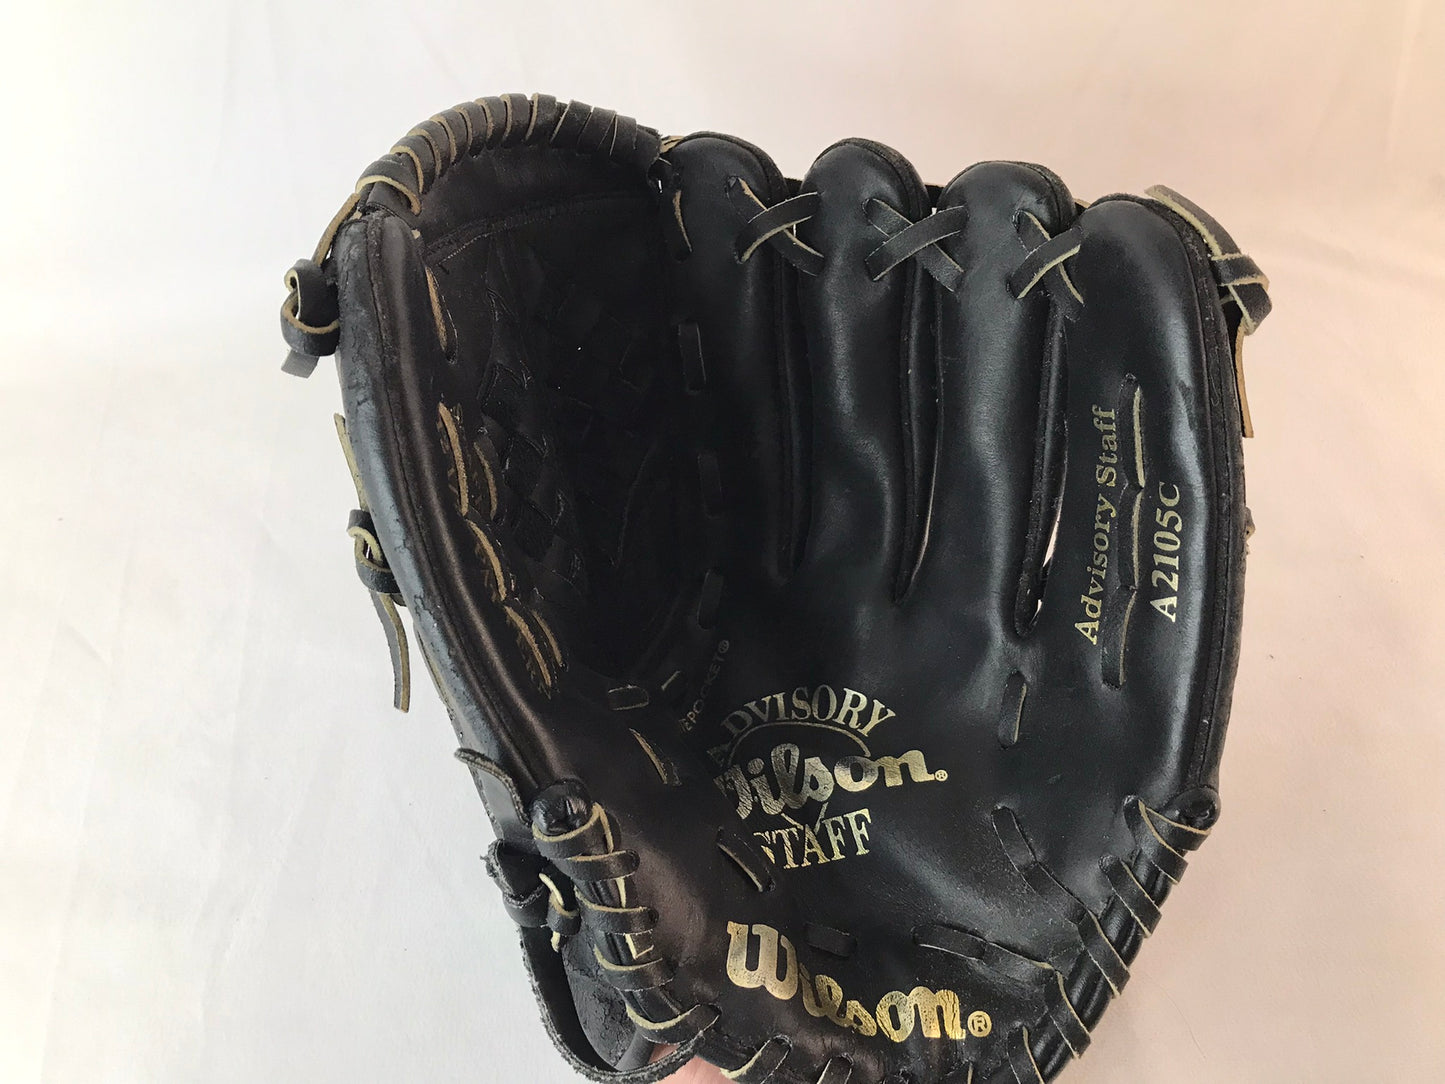 Baseball Glove Adult Size 12.5 inch Wilson Black Leather Fits on LEFT Hand Minor Wear